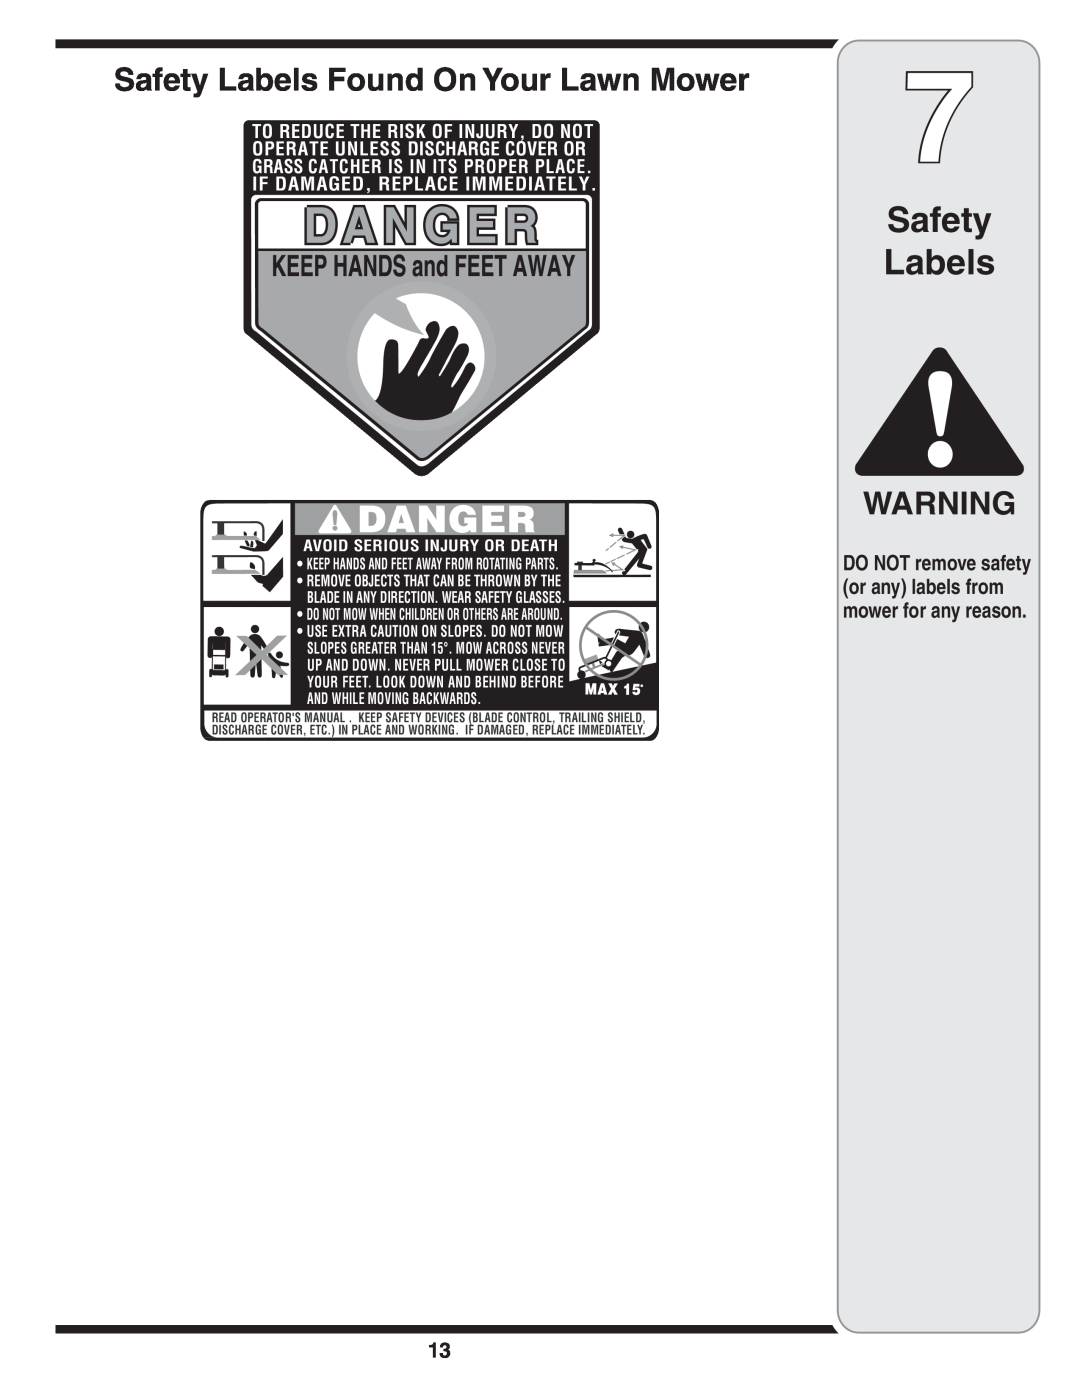 Troy-Bilt 429 Safety Labels Found On Your Lawn Mower, DO NOT remove safety or any labels from mower for any reason 